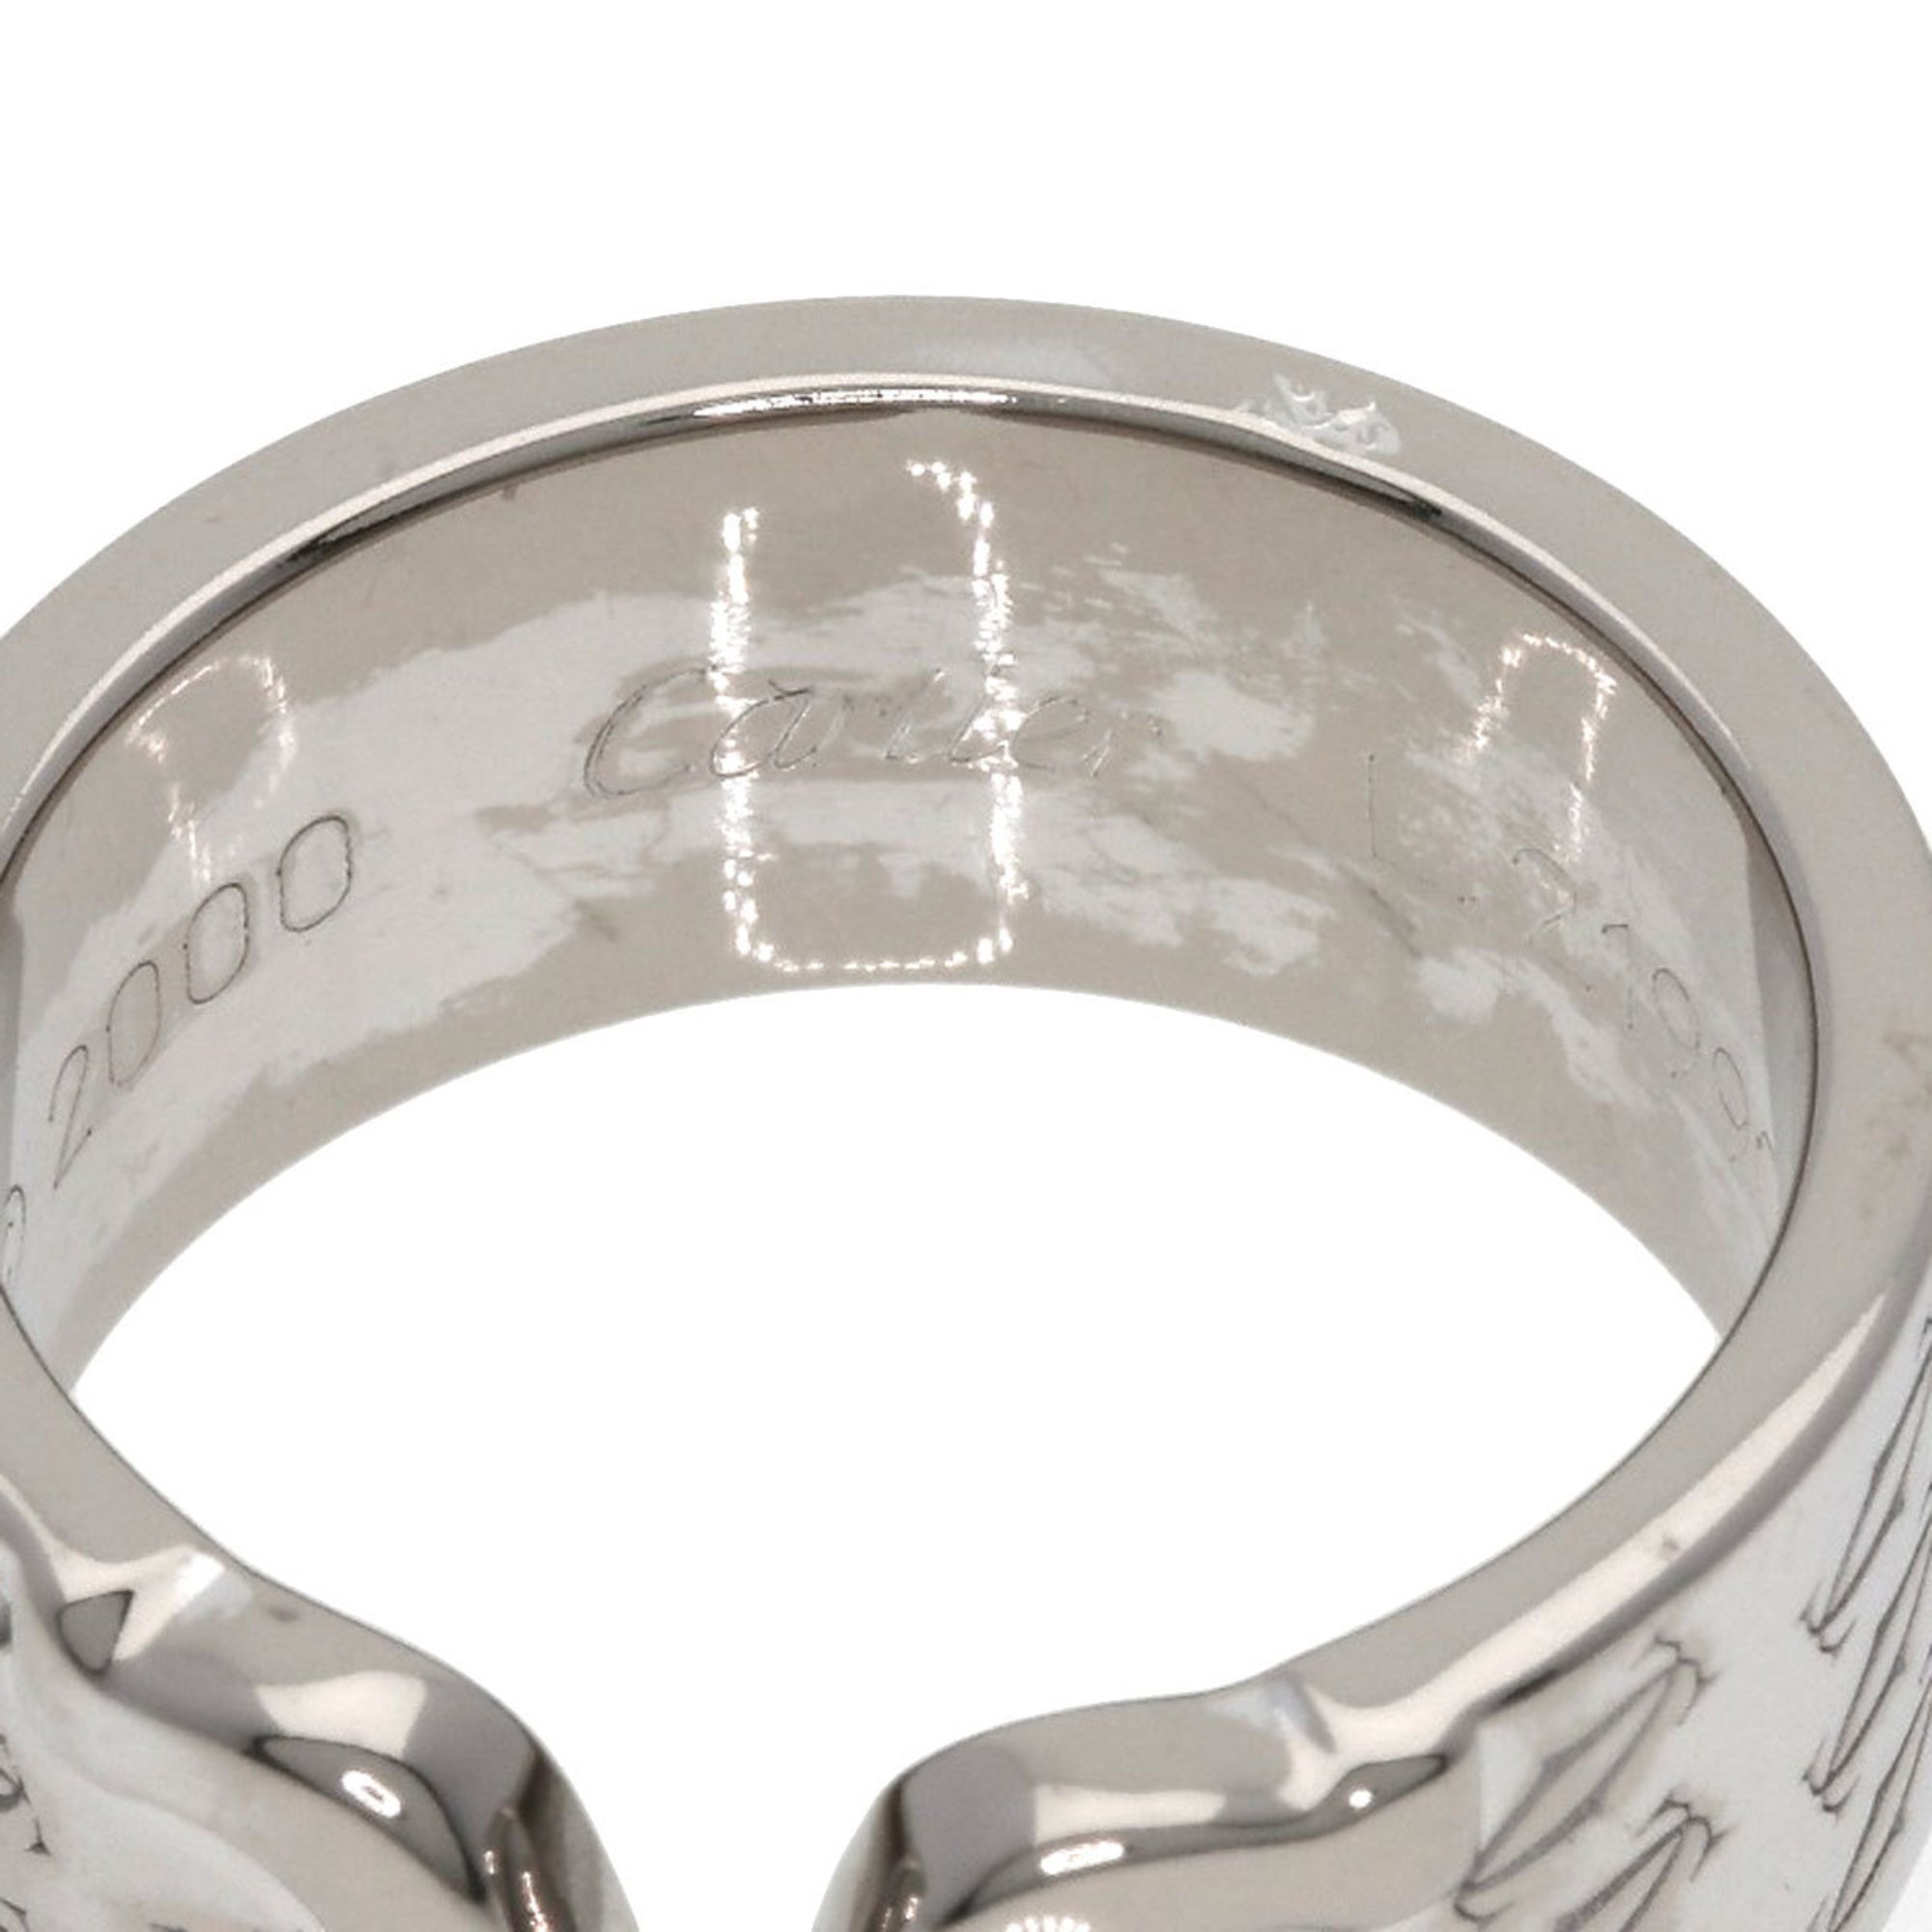 Cartier 2C Ring 2000 Limited Edition #50 K18 White Gold Ladies CARTIER